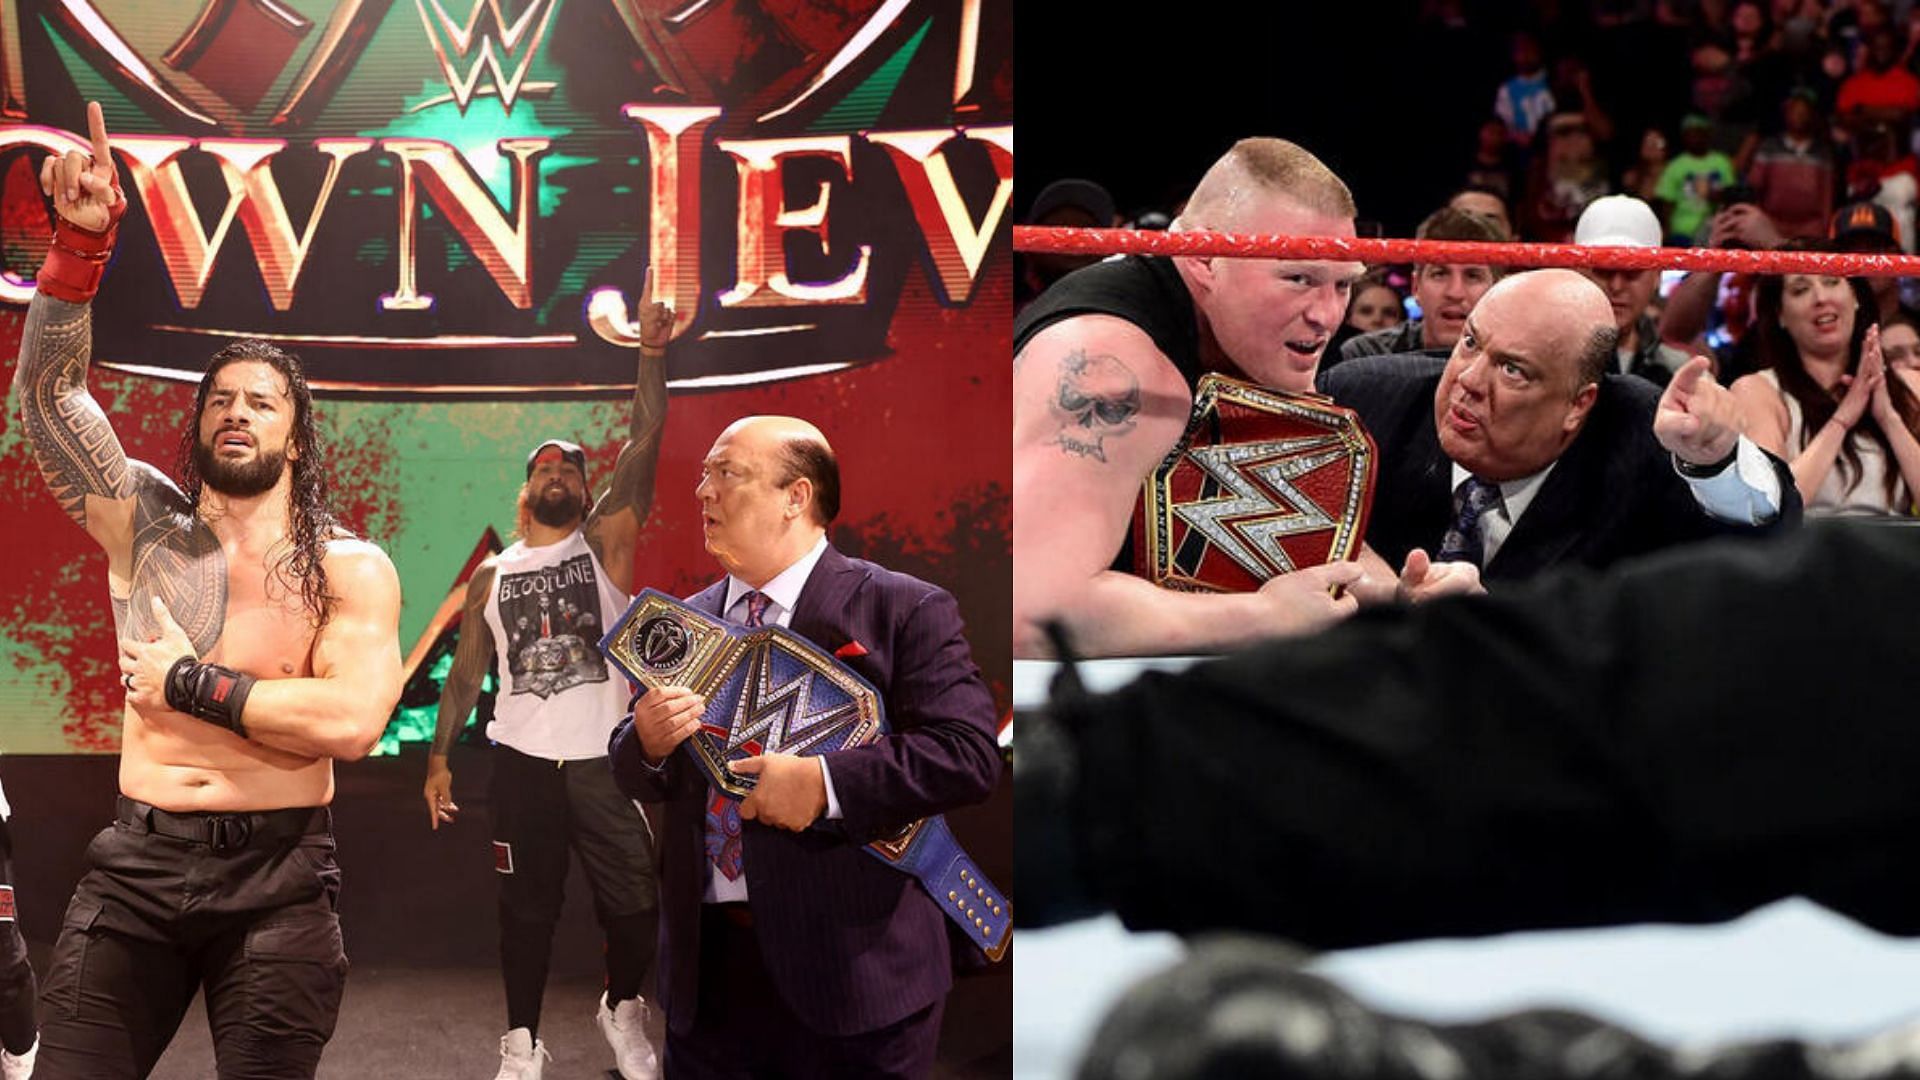 Paul Heyman has been the manager for some of the top stars in WWE history